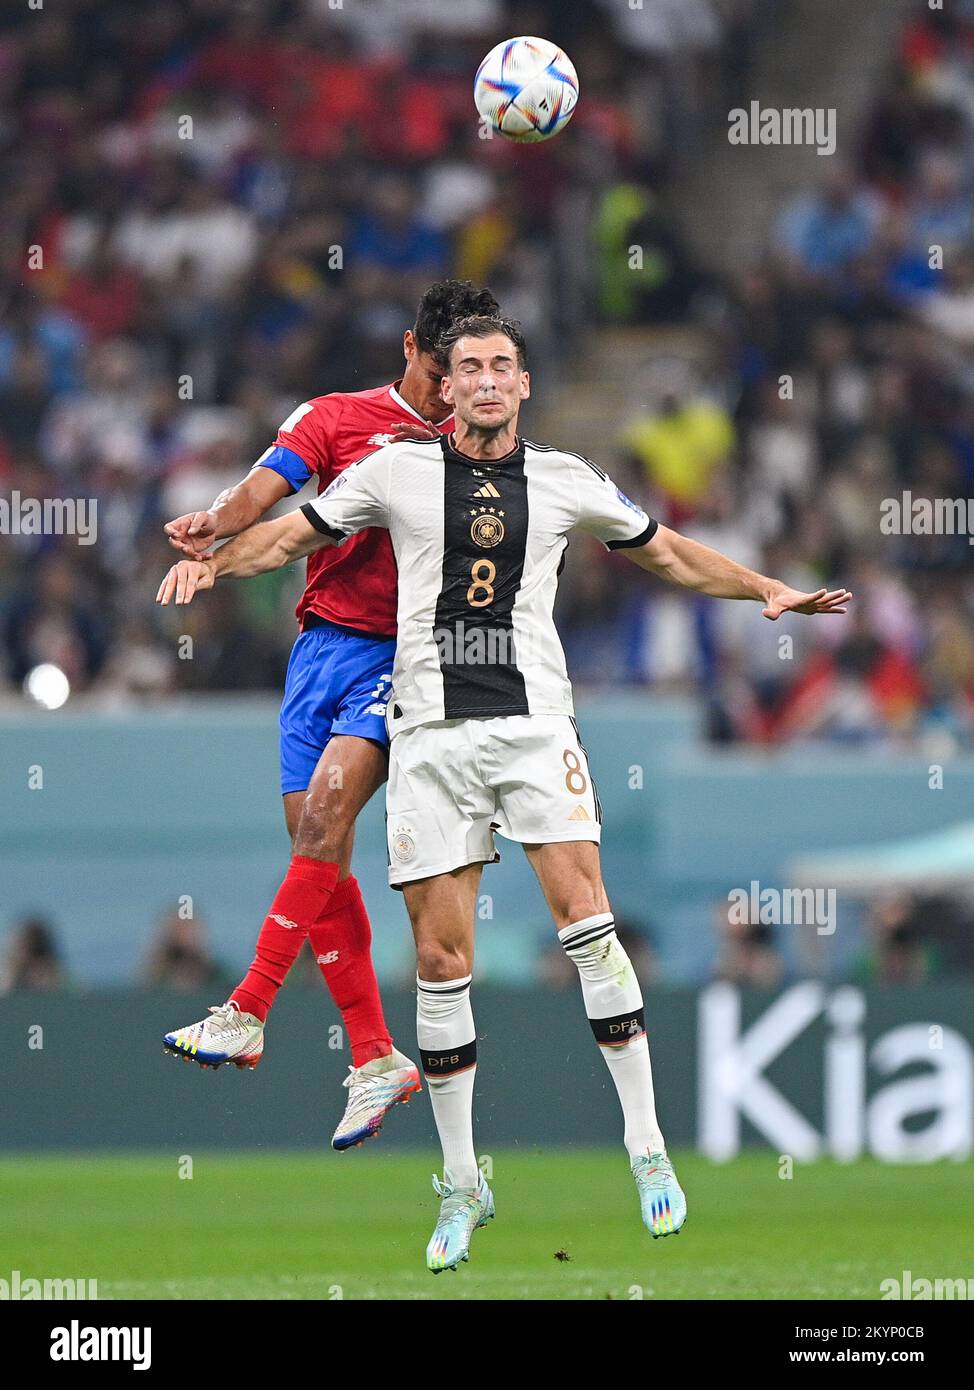 AL KHOR, QATAR - DECEMBER 1: Yeltsin Tejeda of Costa Rica battles for the ball with Leon Goretzka of Germany during the Group E - FIFA World Cup Qatar 2022 match between Costa Rica and Germany at the Al Bayt Stadium on December 1, 2022 in Al Khor, Qatar (Photo by Pablo Morano/BSR Agency) Stock Photo